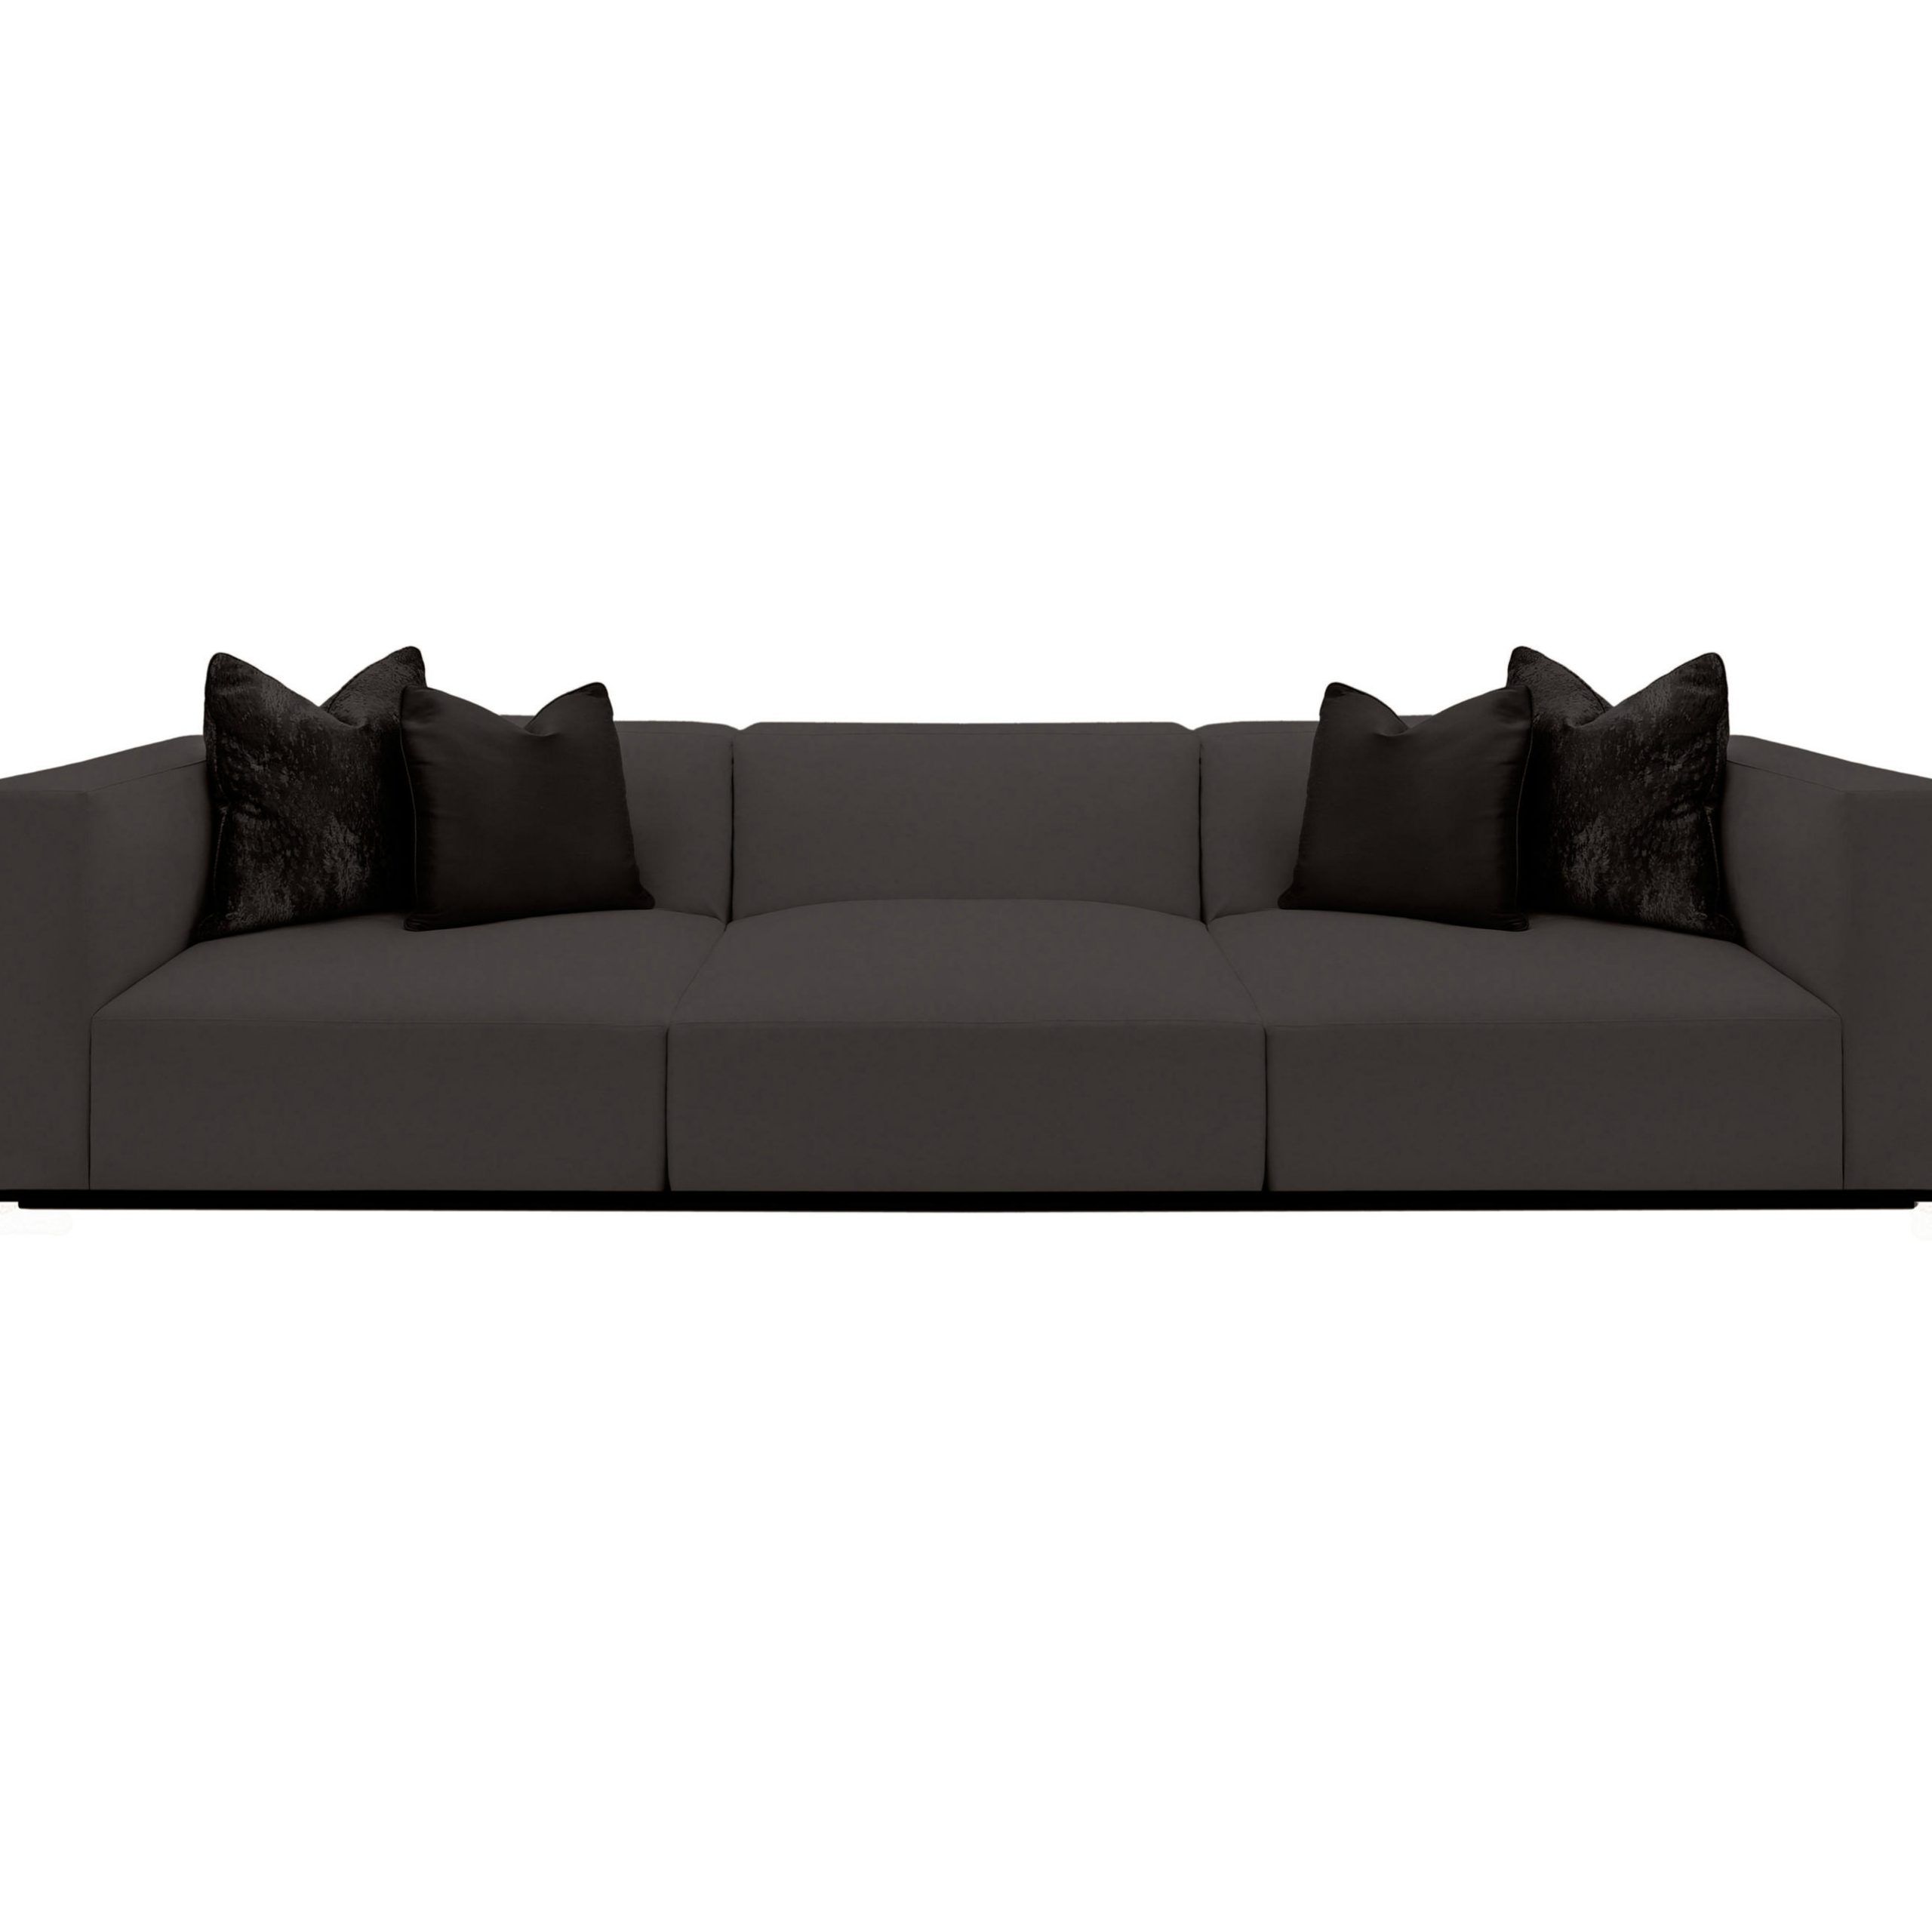 Hayward Large Sofa & Designer Furniture | Architonic With Large Sofa Chairs (View 11 of 15)